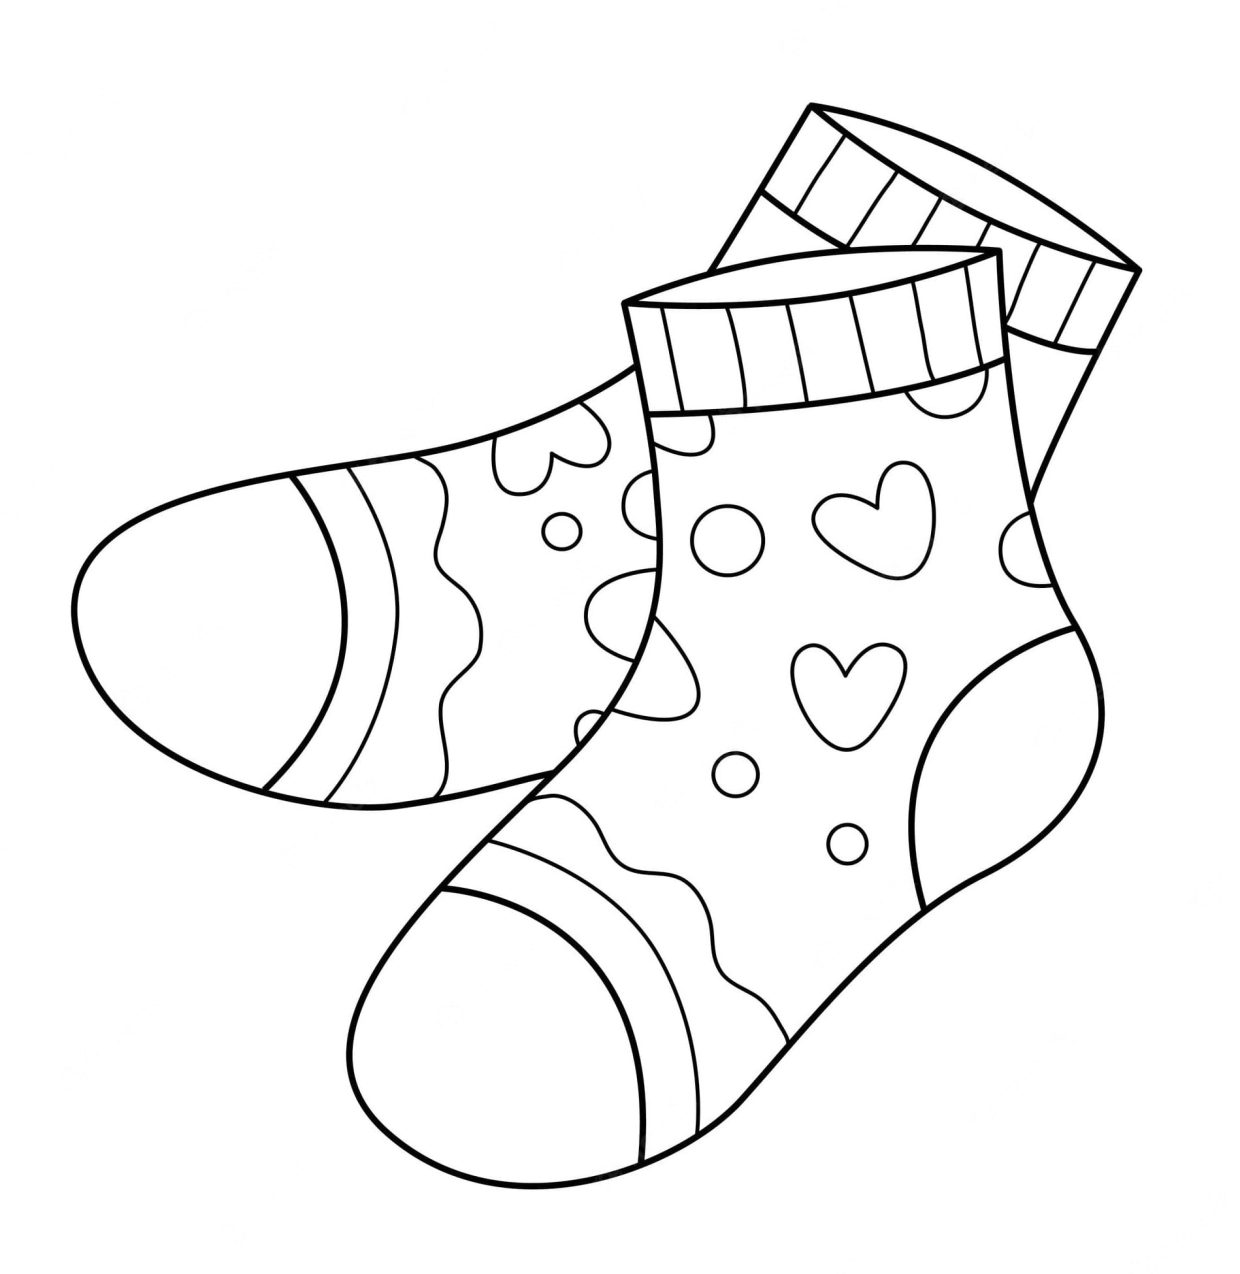 Printable Socks Coloring Pages Free For Kids And Adults